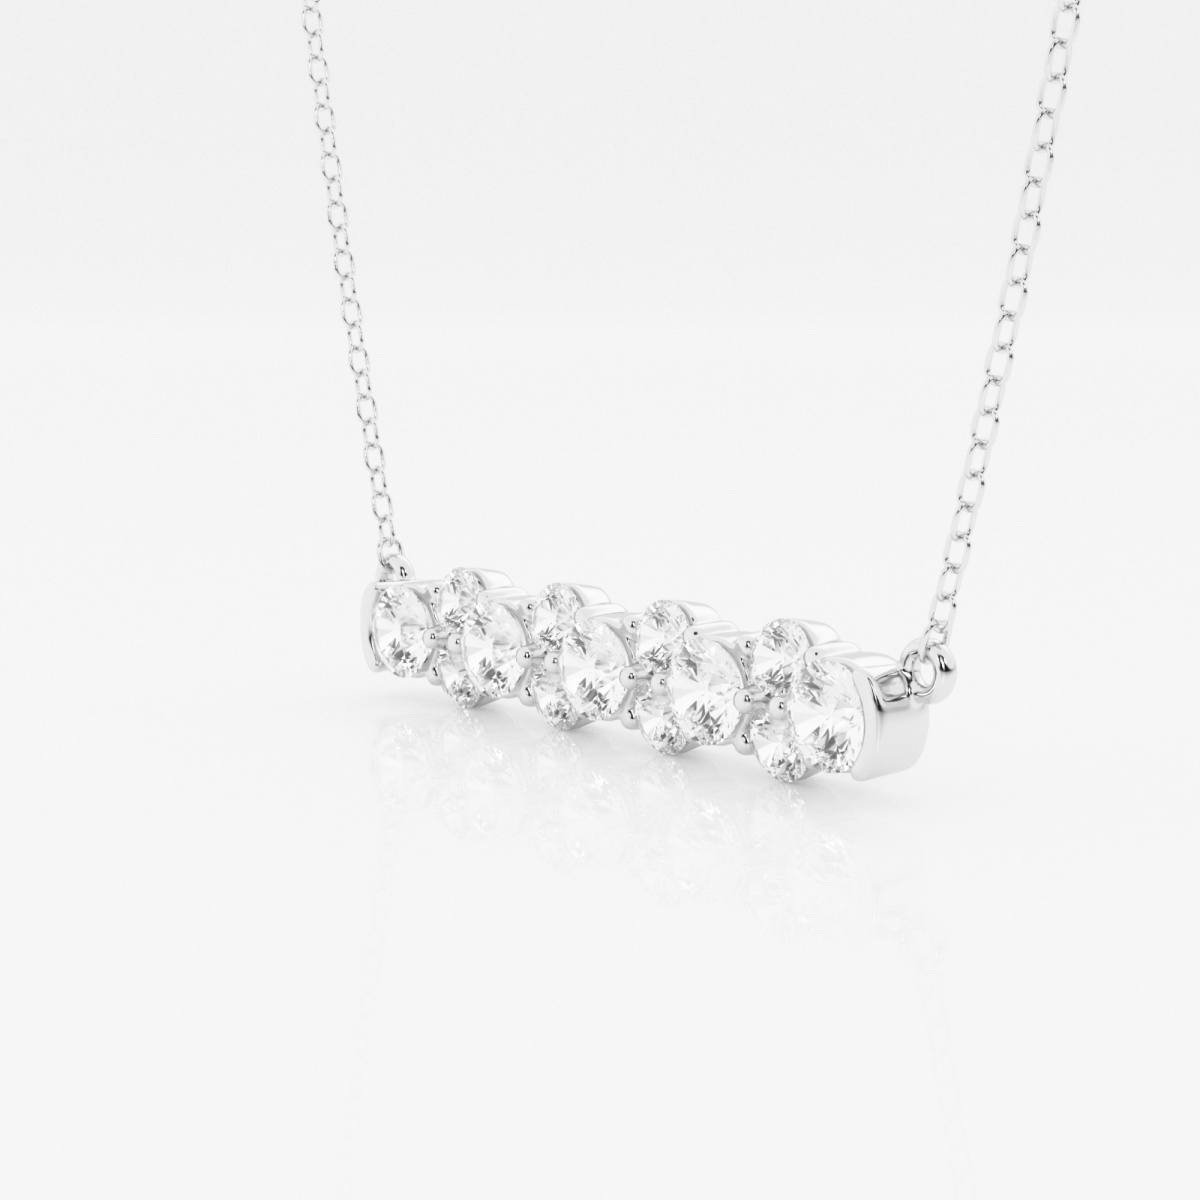 Additional Image 1 for  1 1/2 ctw Round Lab Grown Diamond Garland Fashion Pendant With Adjustable Chain